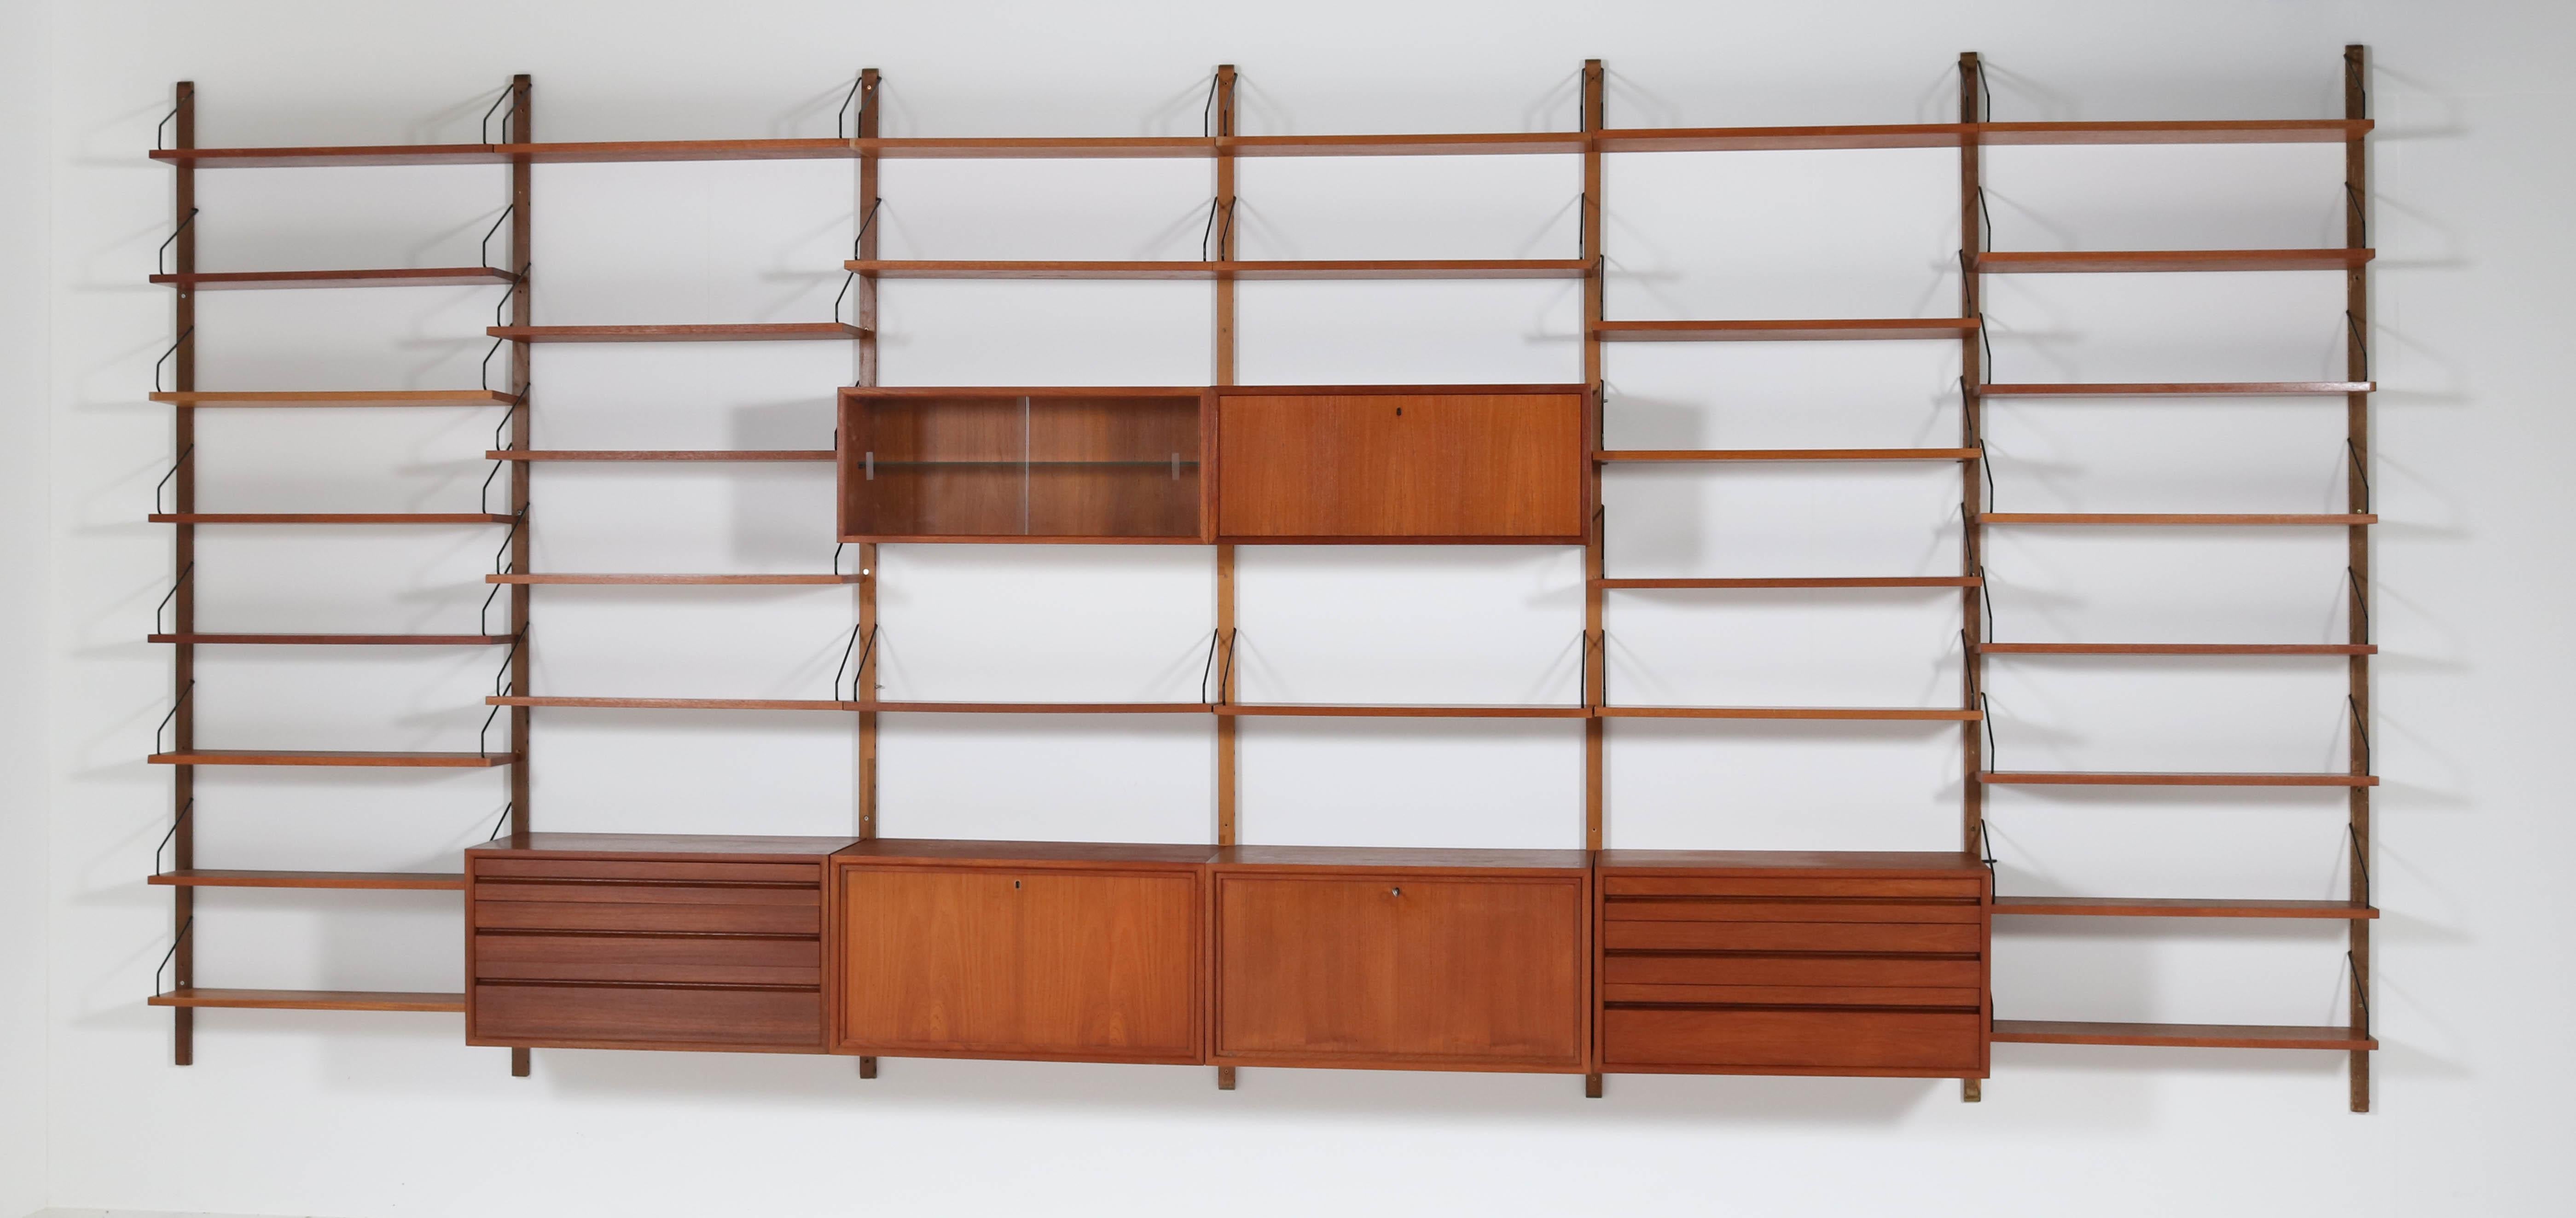 Magnificent extra large Mid-Century Modern teak modular wall unit.
Design by Poul Cadovius for Cado.
Striking design from the sixties.
This wall unit consists of:
7 uprights: H 225 cm or
2 cabinets with drawers: H 42.5 cm or 16.73 in., W 80 cm